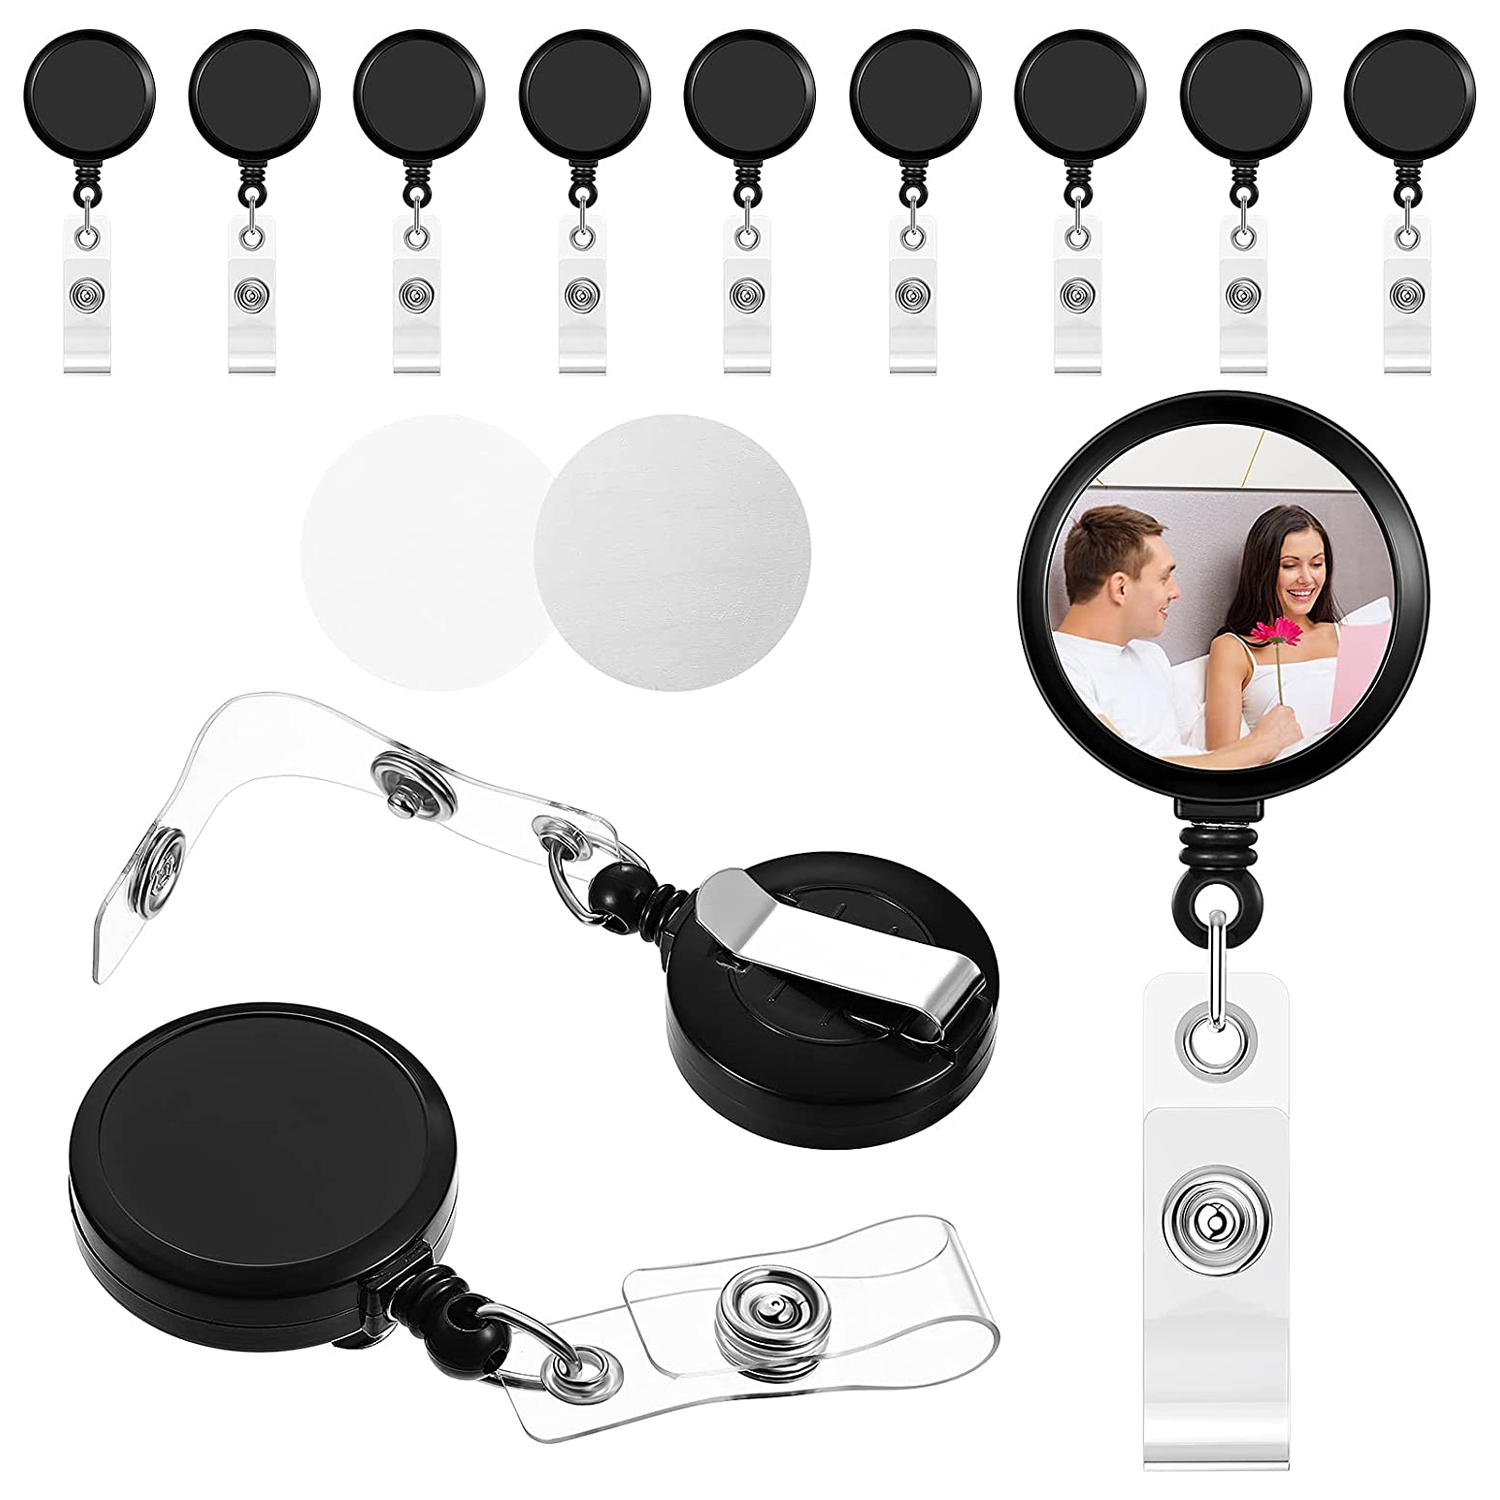 12pcs Sublimation Retractable Badge Holder With Belt Clip, Blank Nurse ID  Badge Reels For Office Worker Doctor Nurse, Key Card Name Tag Holder For Sub